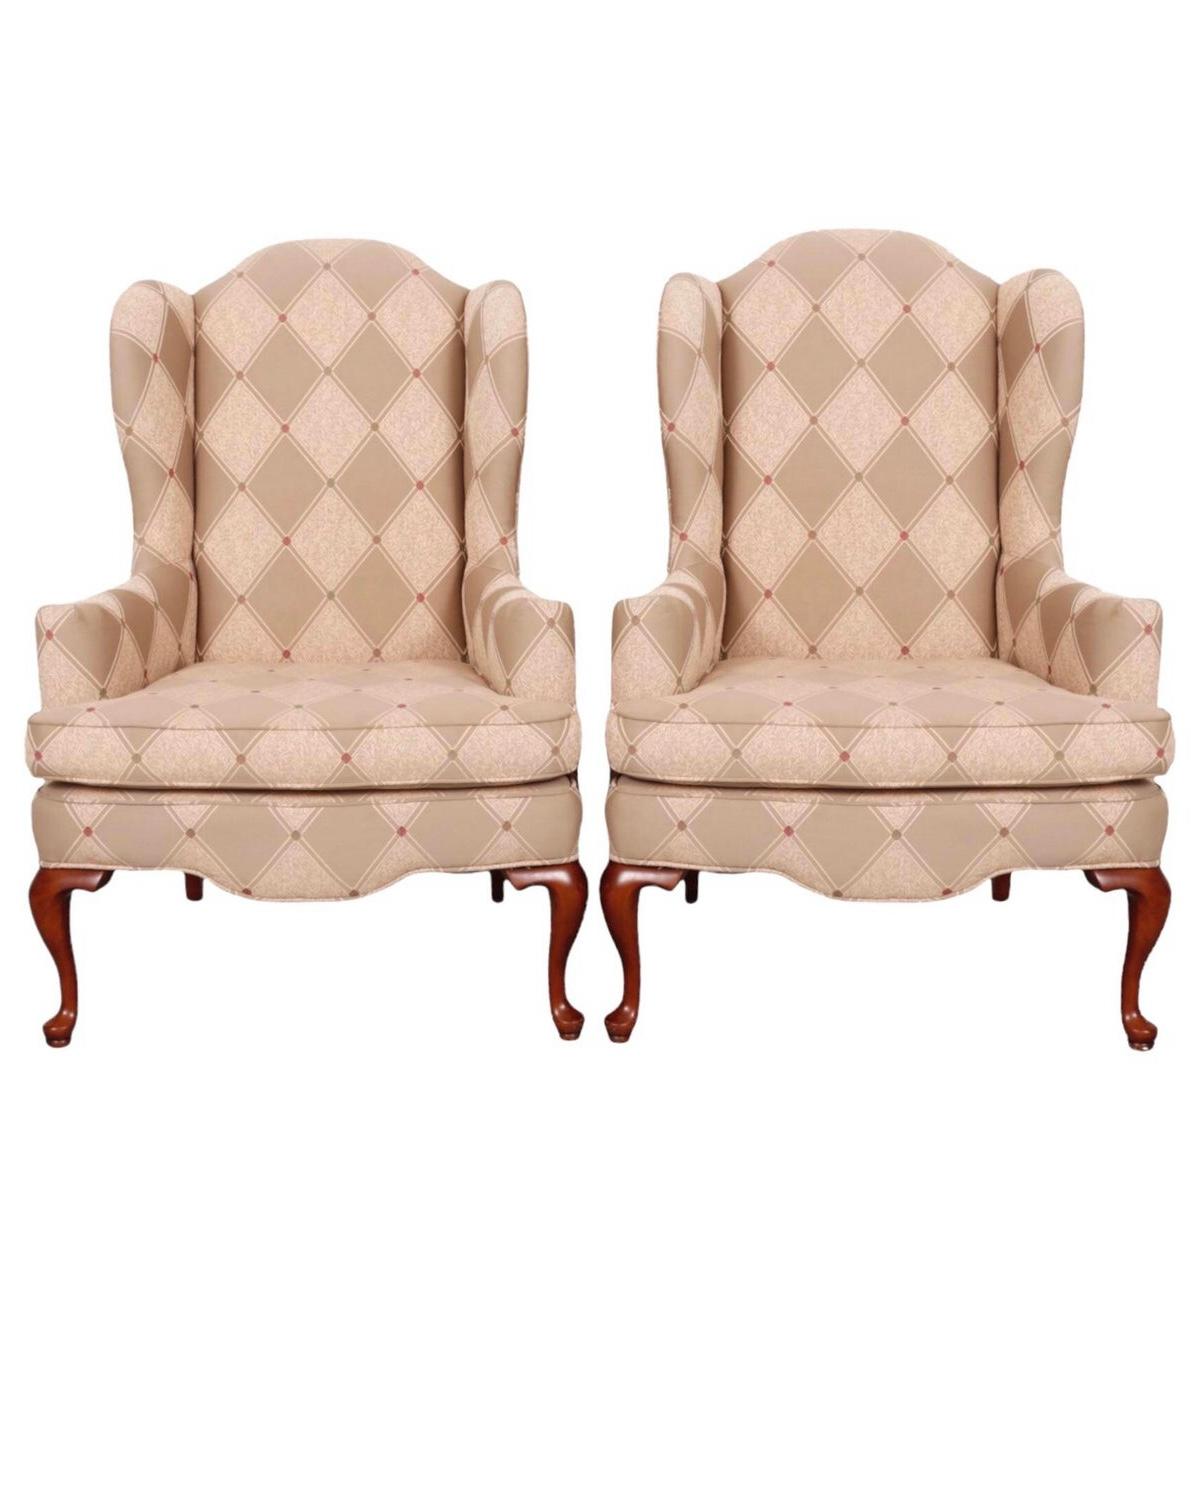 A pair of Queen Anne style wingback chairs. Elegantly curved wings flow into outward rolled, button topped arms, which frame a trapezoid shaped seat. Upholstered throughout in a diamond embossed taupe brocade detailed with brown, sage and wine